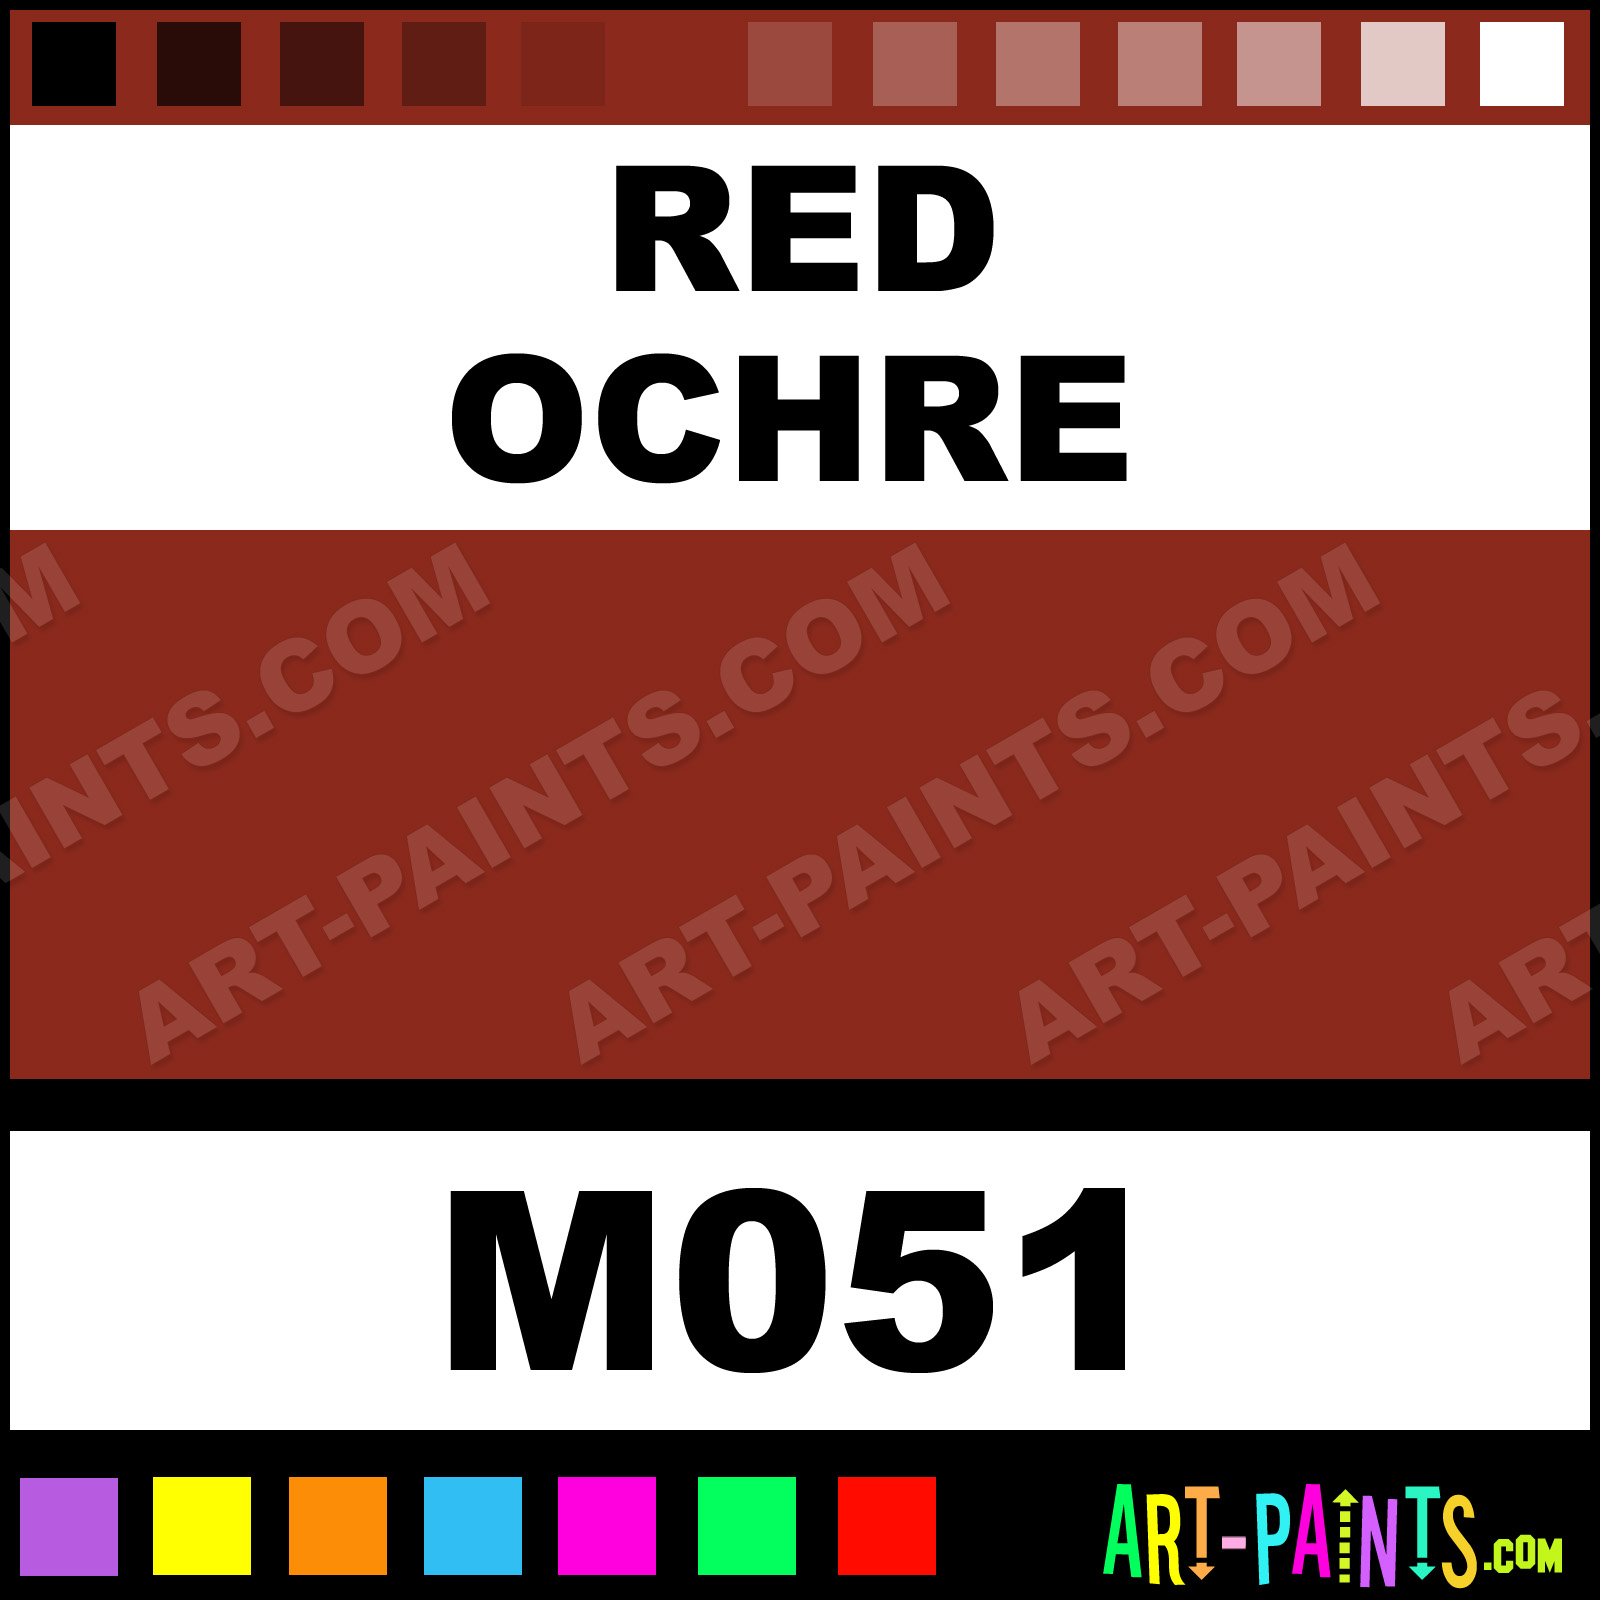 Red Ochre MAT Acrylic Paints - M051 - Red Paint, Red Ochre Color, Holbein Paint, 8A281B - Art-Paints.com